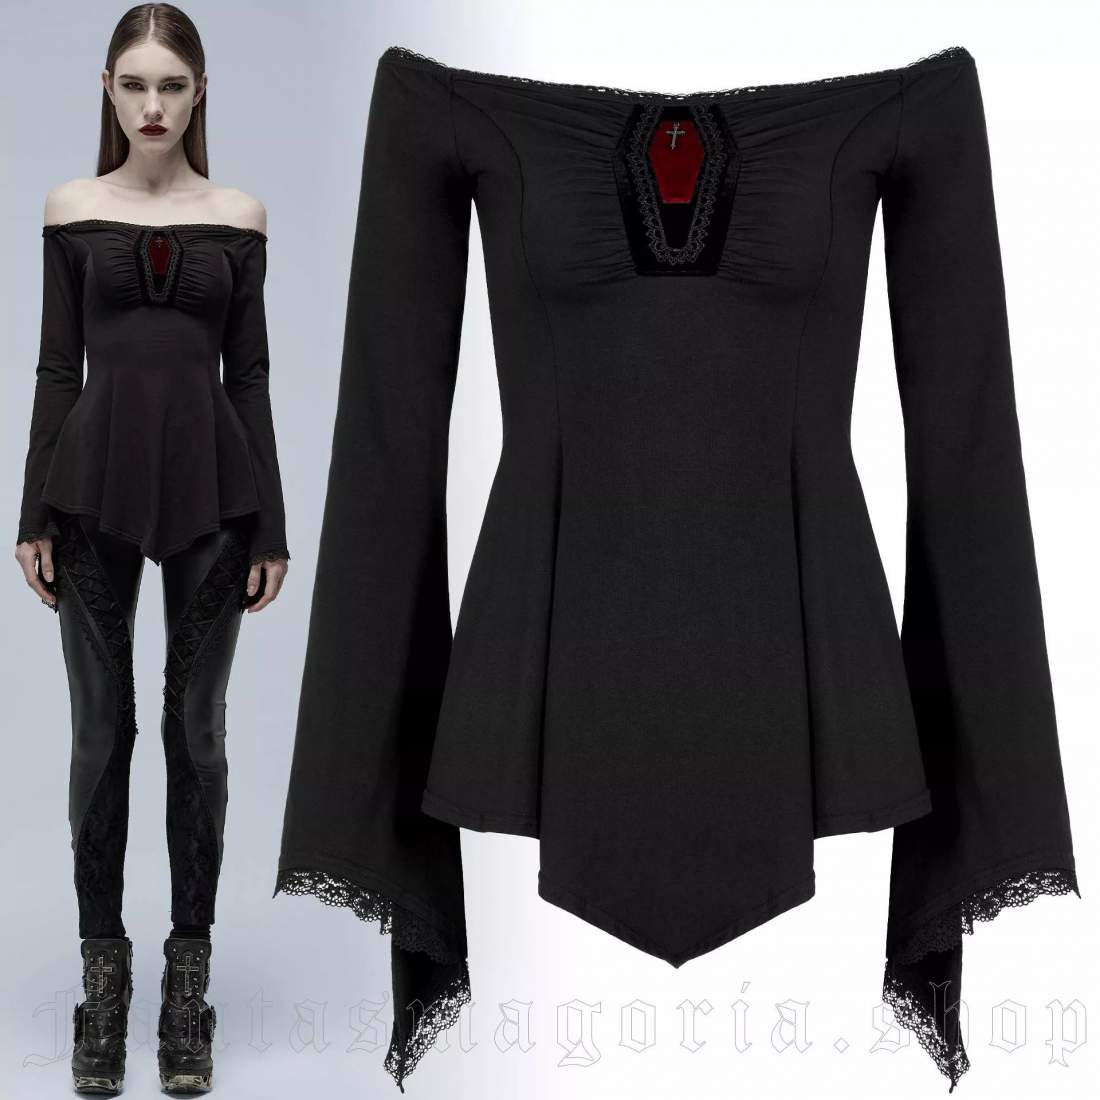 Coffin Coven Top 